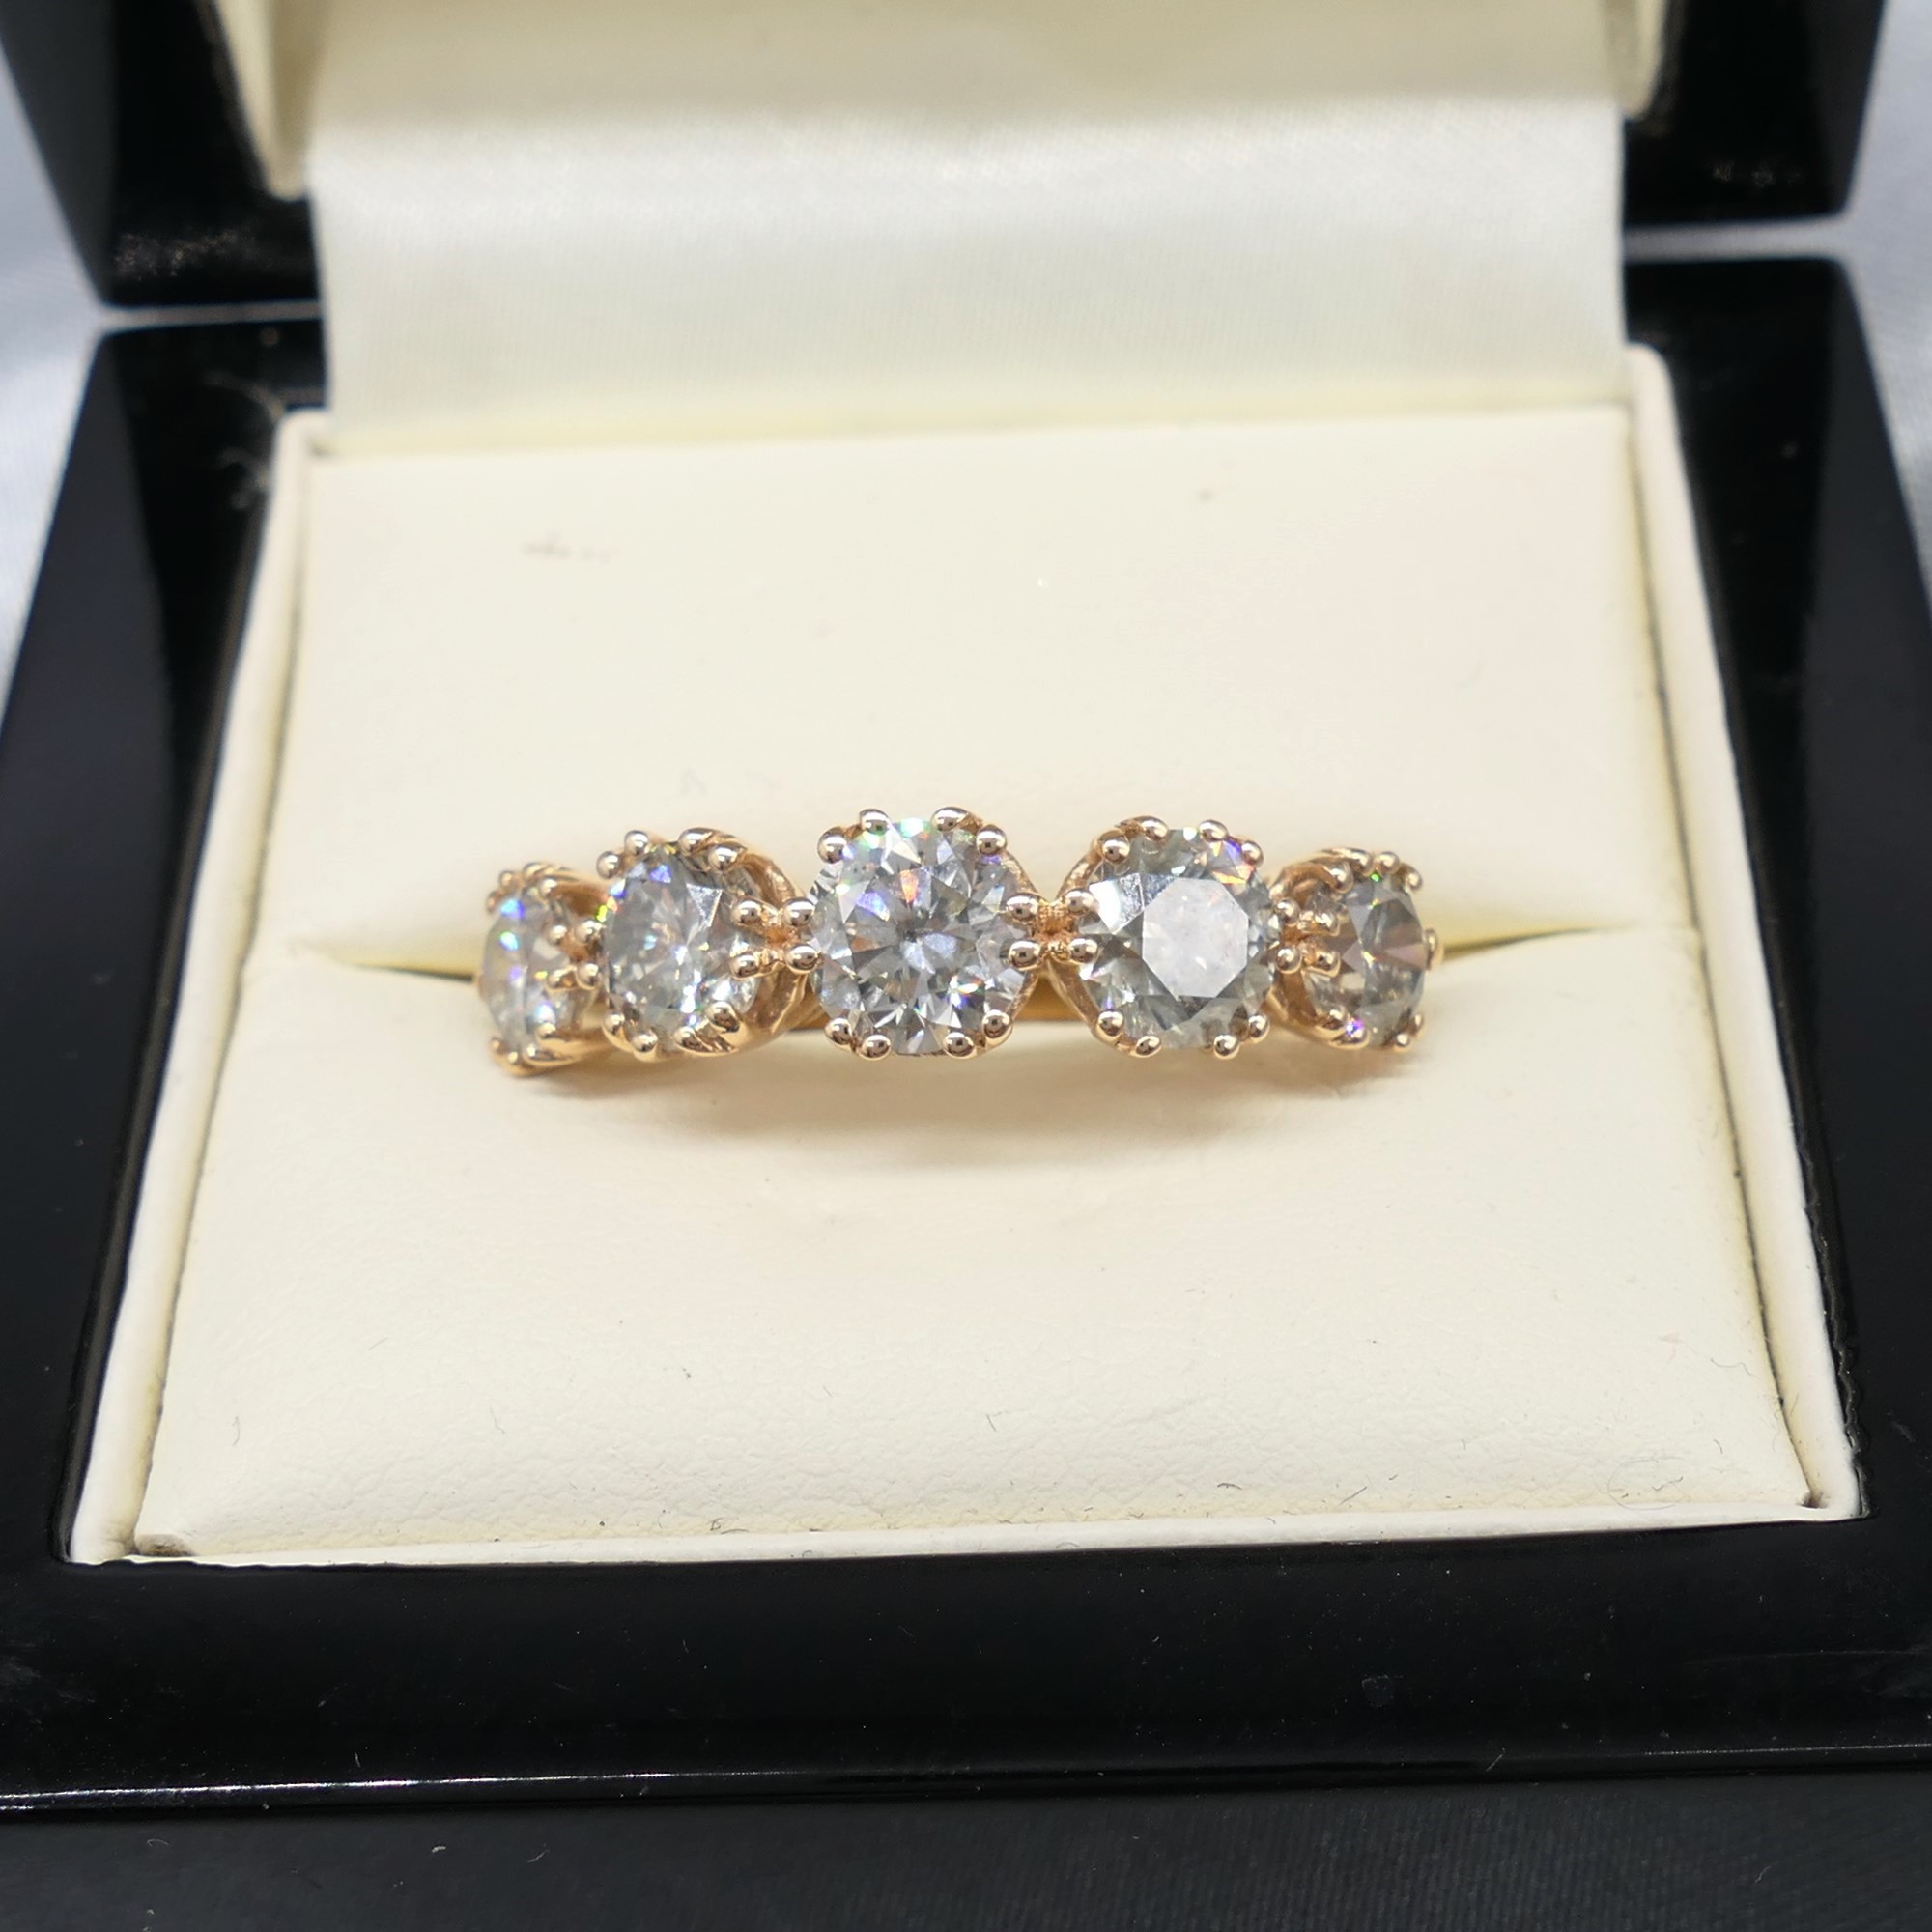 18Ct Rose Gold 3.19 Carat 5-Stone Diamond Ring With Certificate and Gift Box - Image 6 of 8